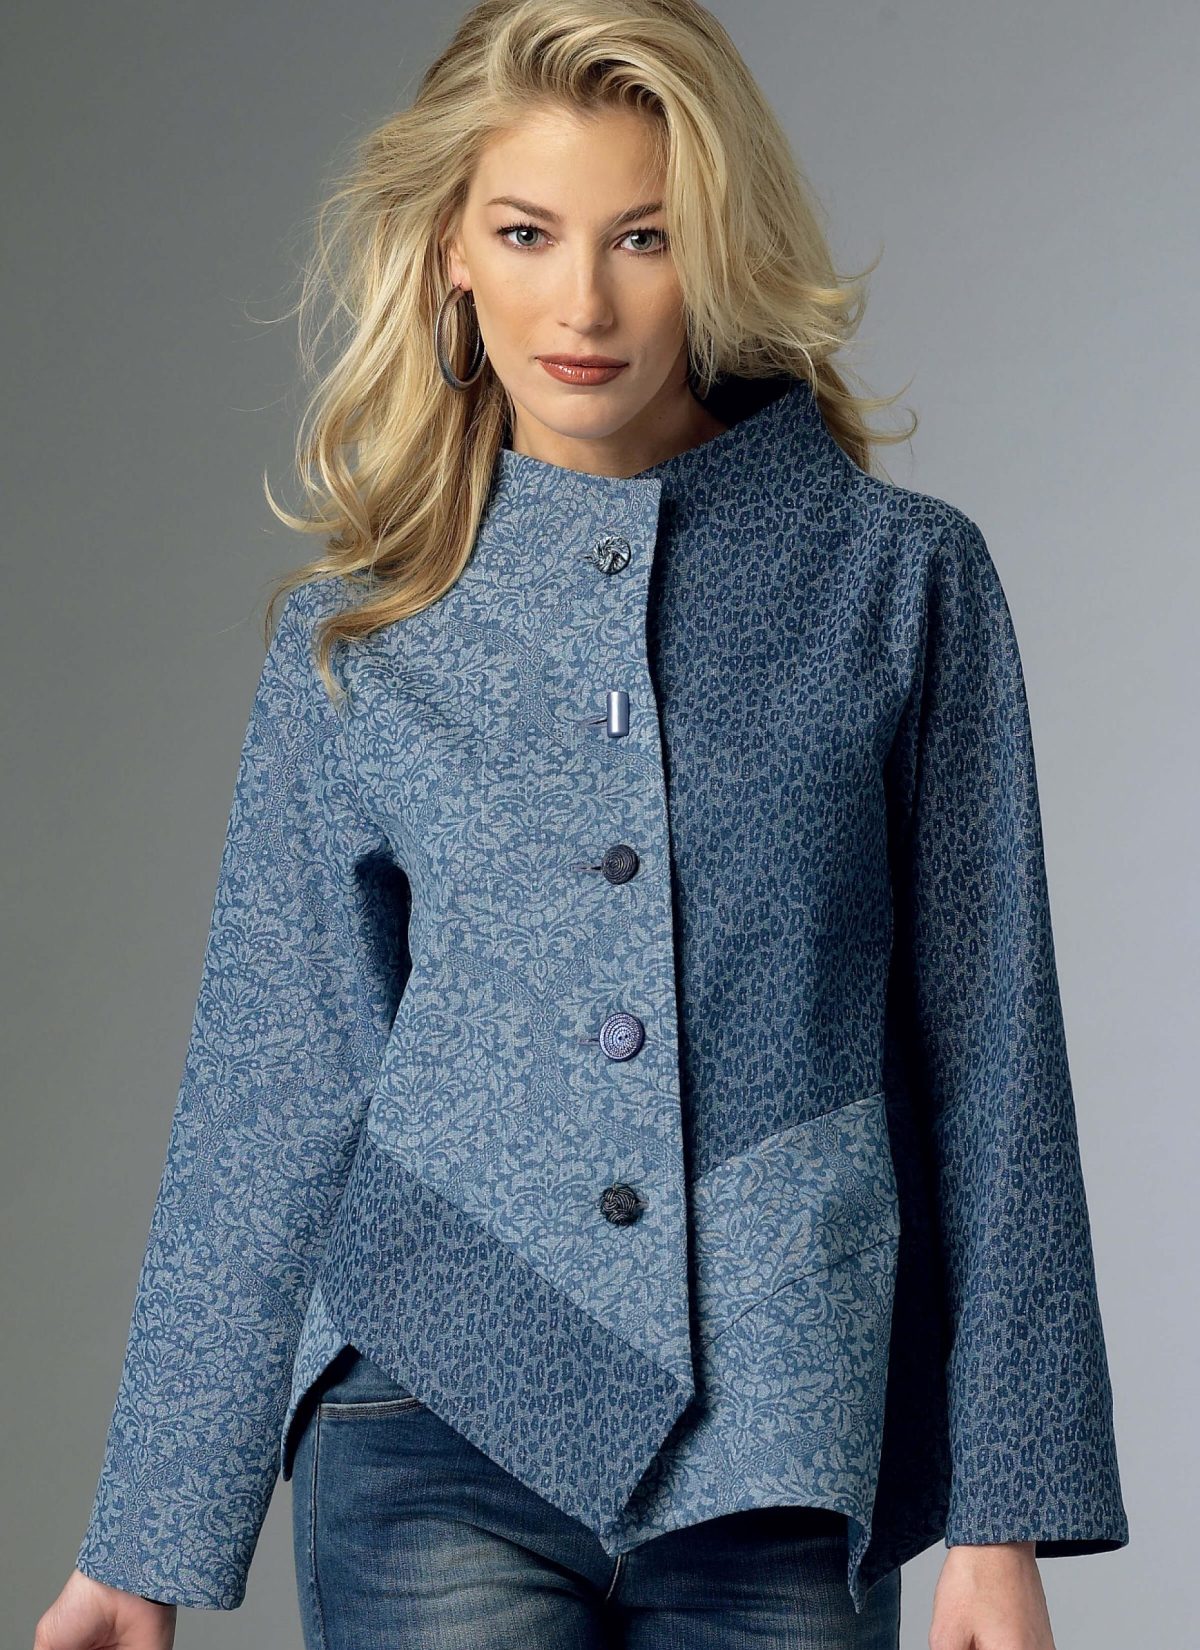 Butterick Sewing Pattern B6106 Misses' Jacket